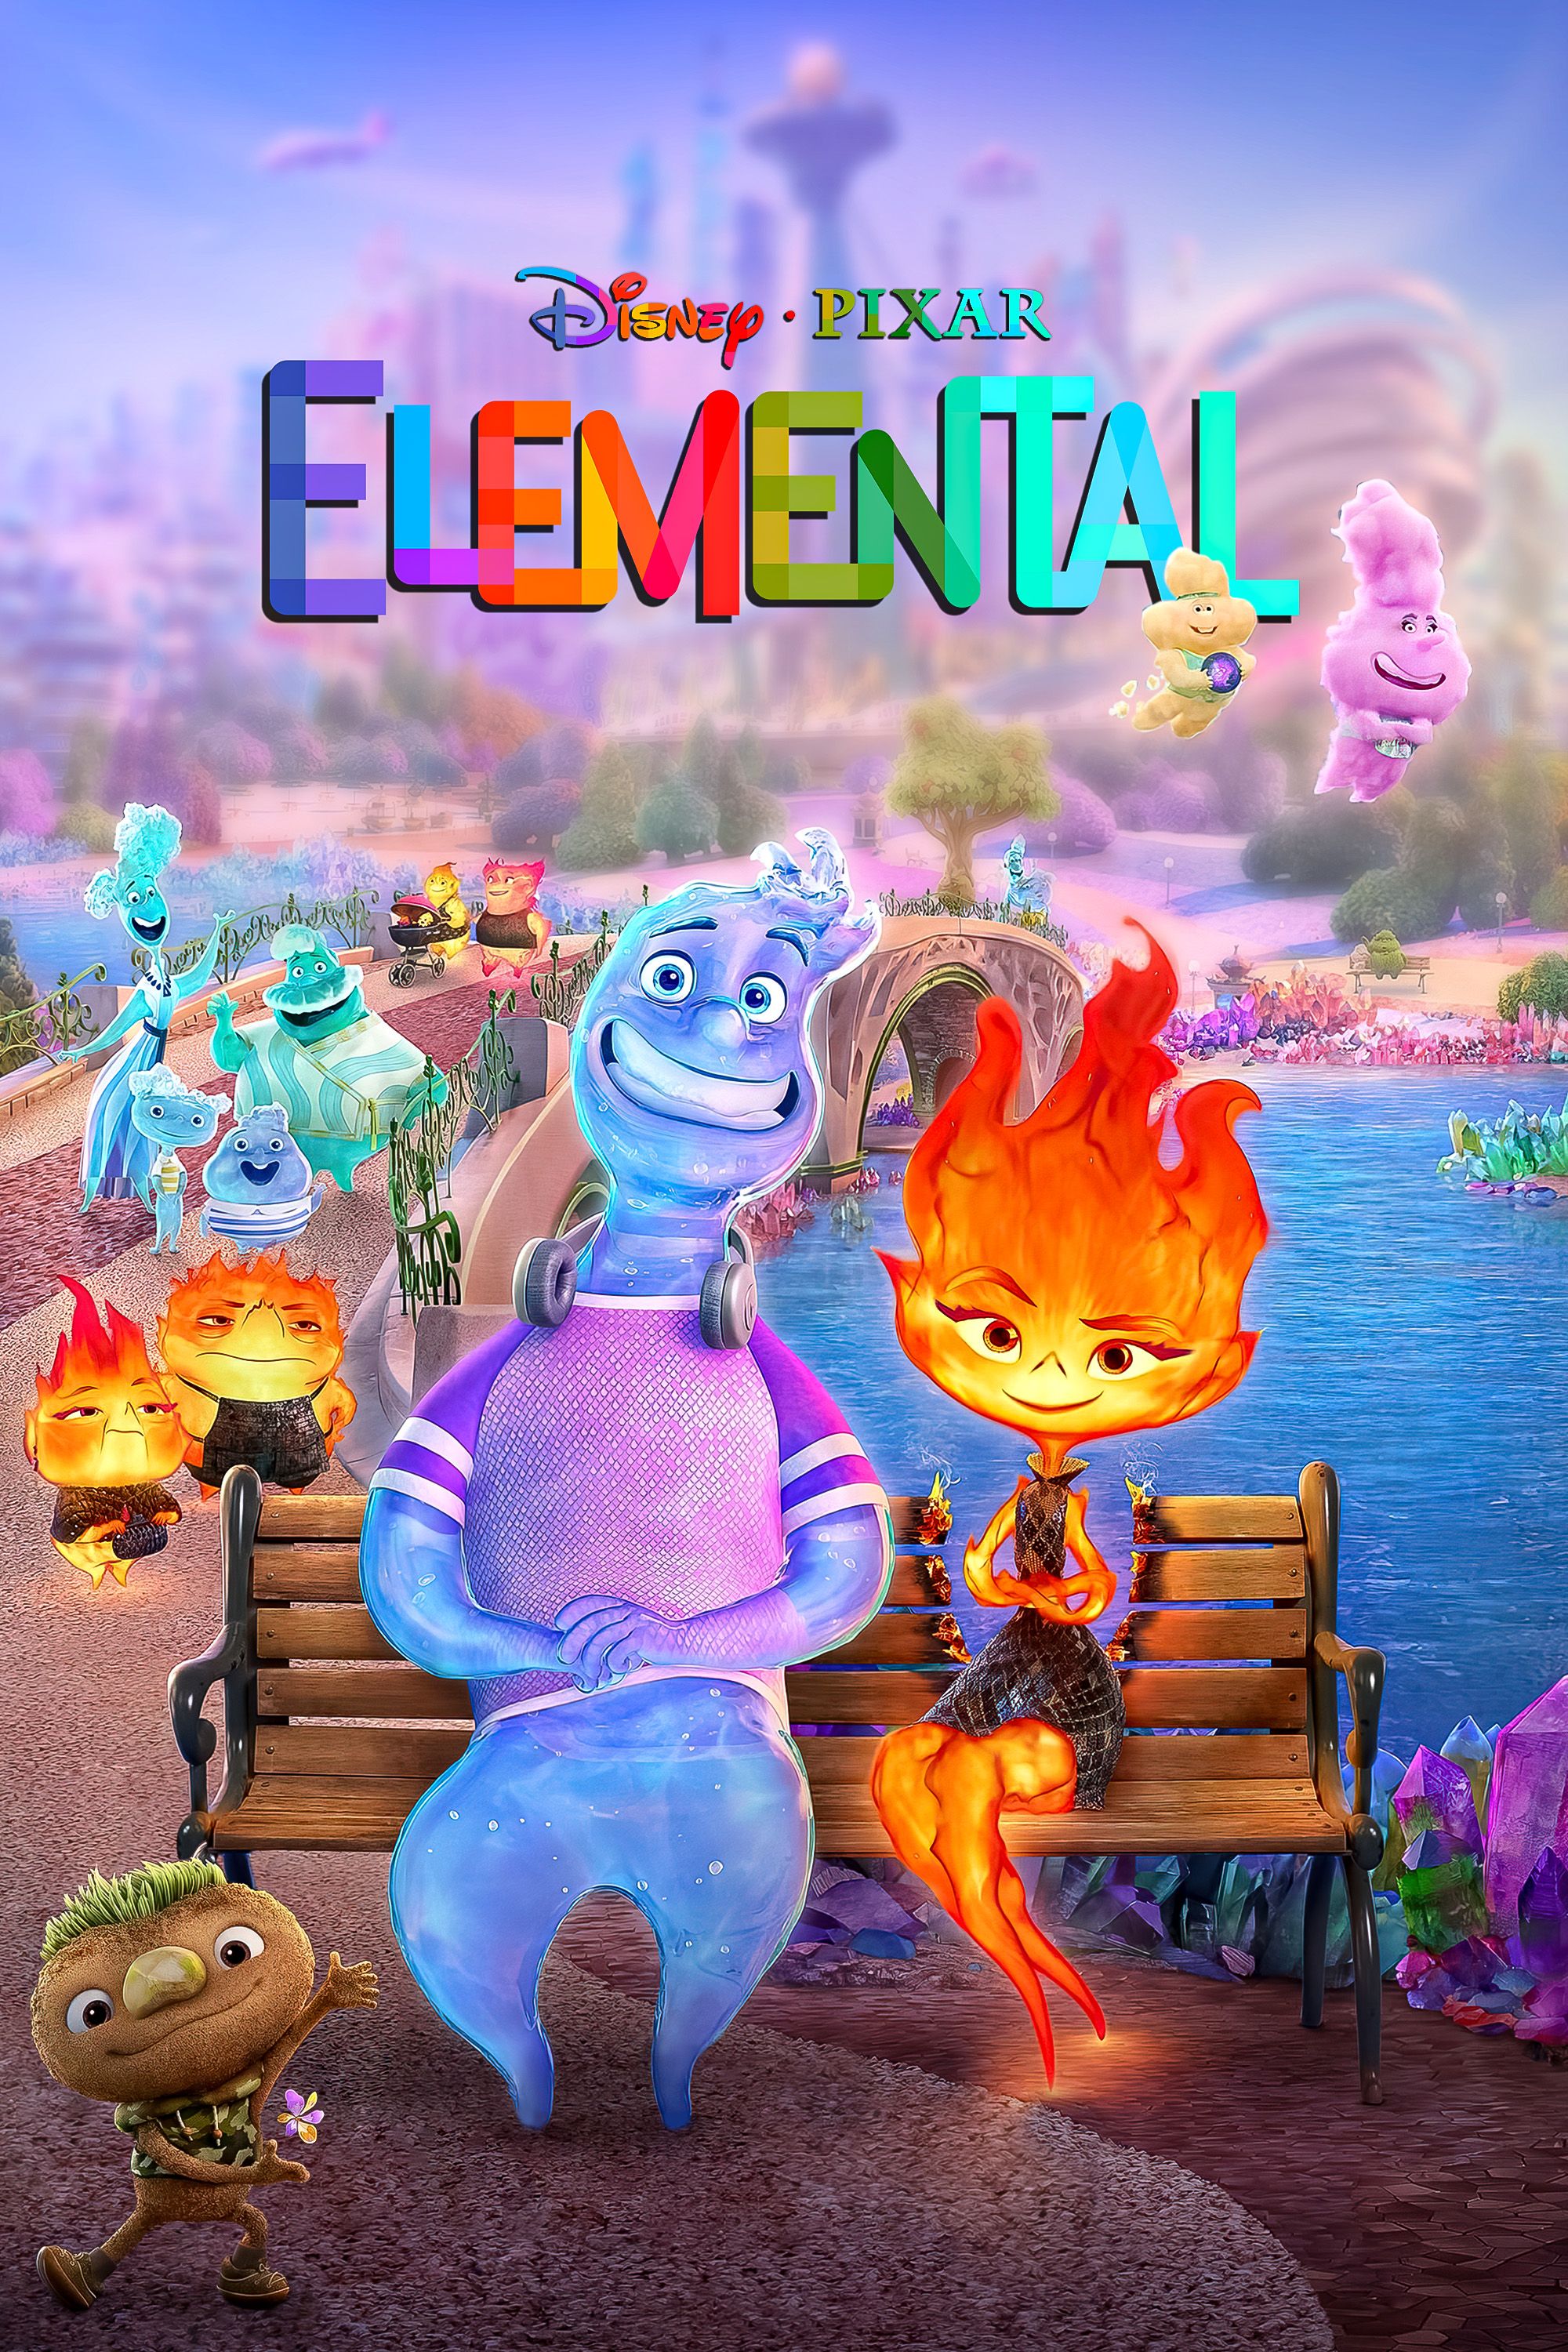 The poster for Elemental